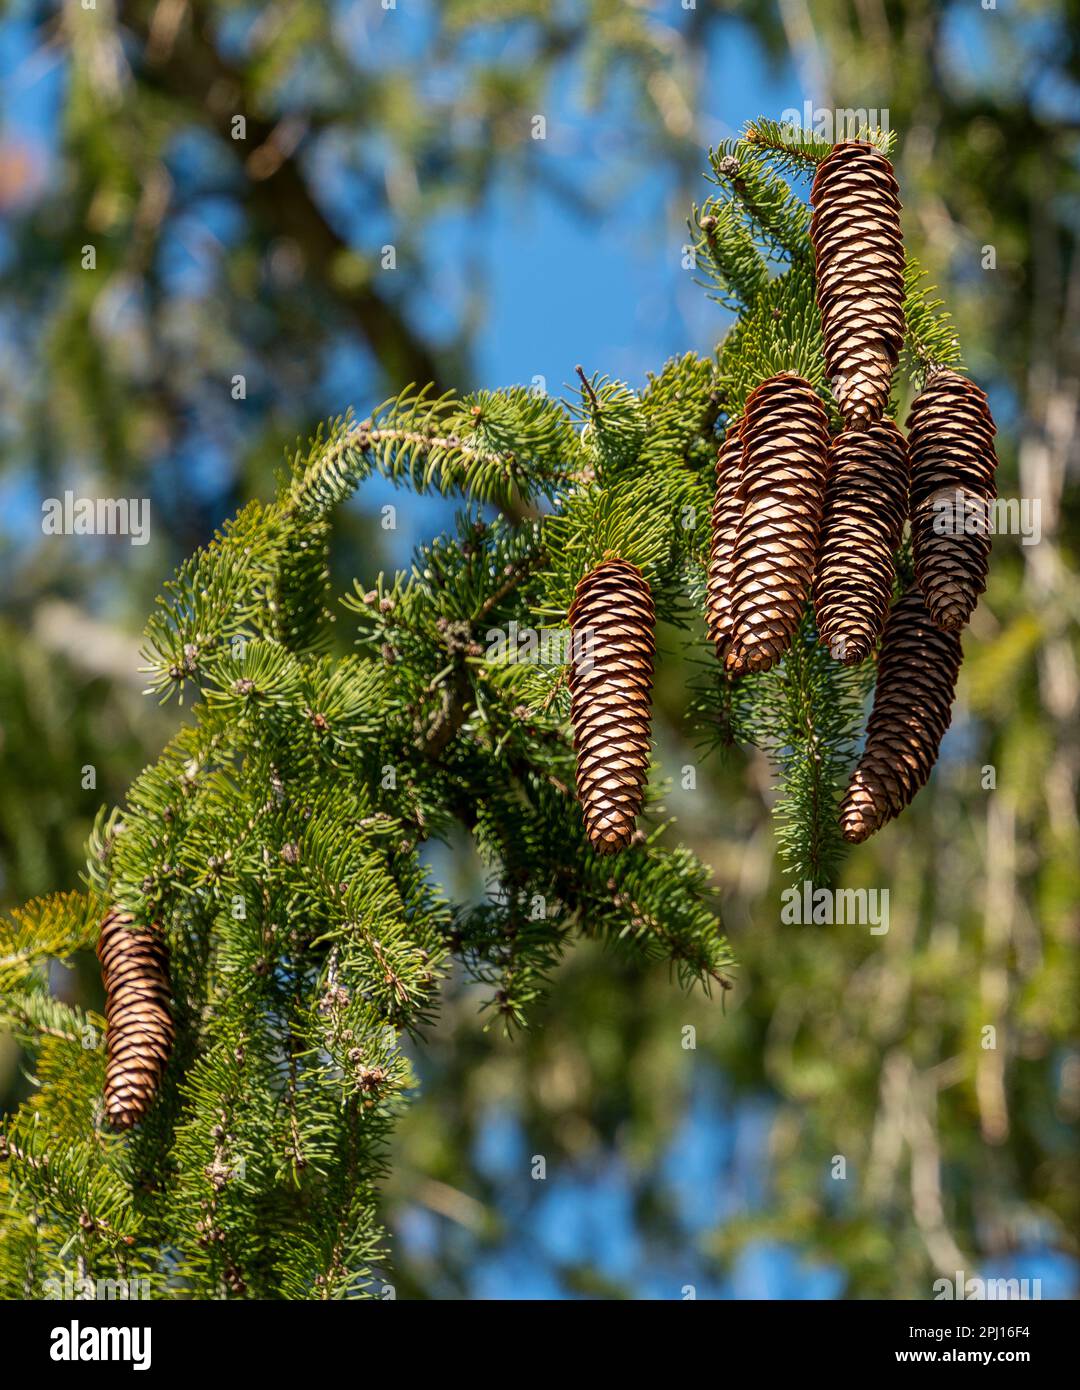 Low angle shot showing some spruce cones on a twig in sunny ambiance Stock Photo